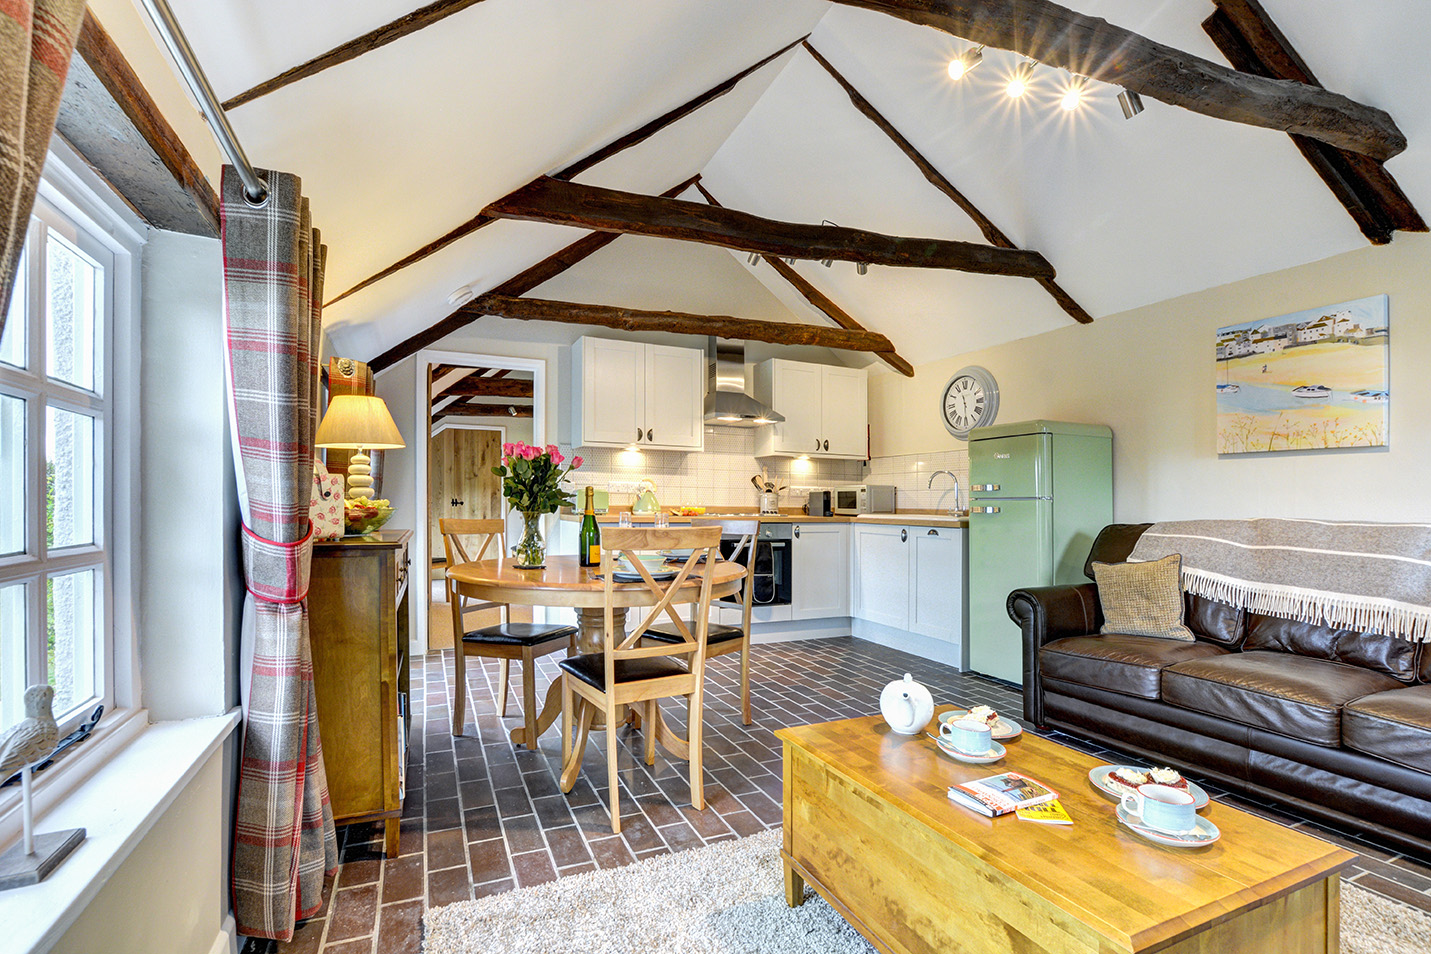 The lounge diner kitchen of The Linney self catering cottage converted barn at Penrose Burden holiday cottages in Cornwall 01.jpg